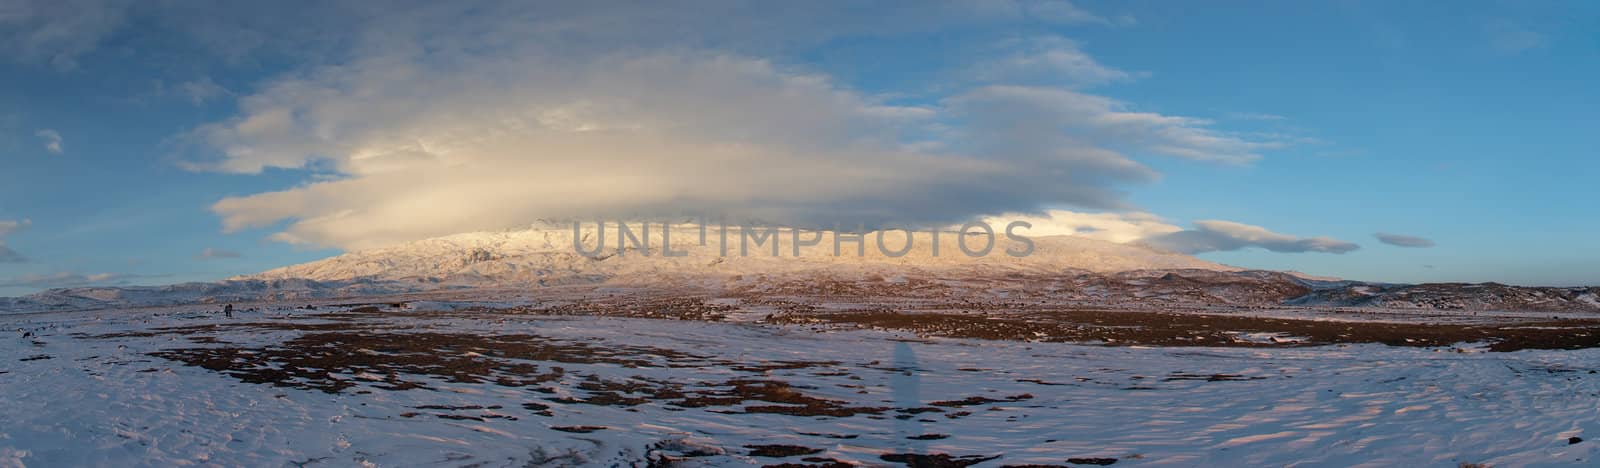 Winter sunset panoramic image from the valley to the south of Ararat. Mount Ararat (Agri Dagi) is an inactive volcano located near Iranian and Armenian borders and the tallest peak in Turkey.